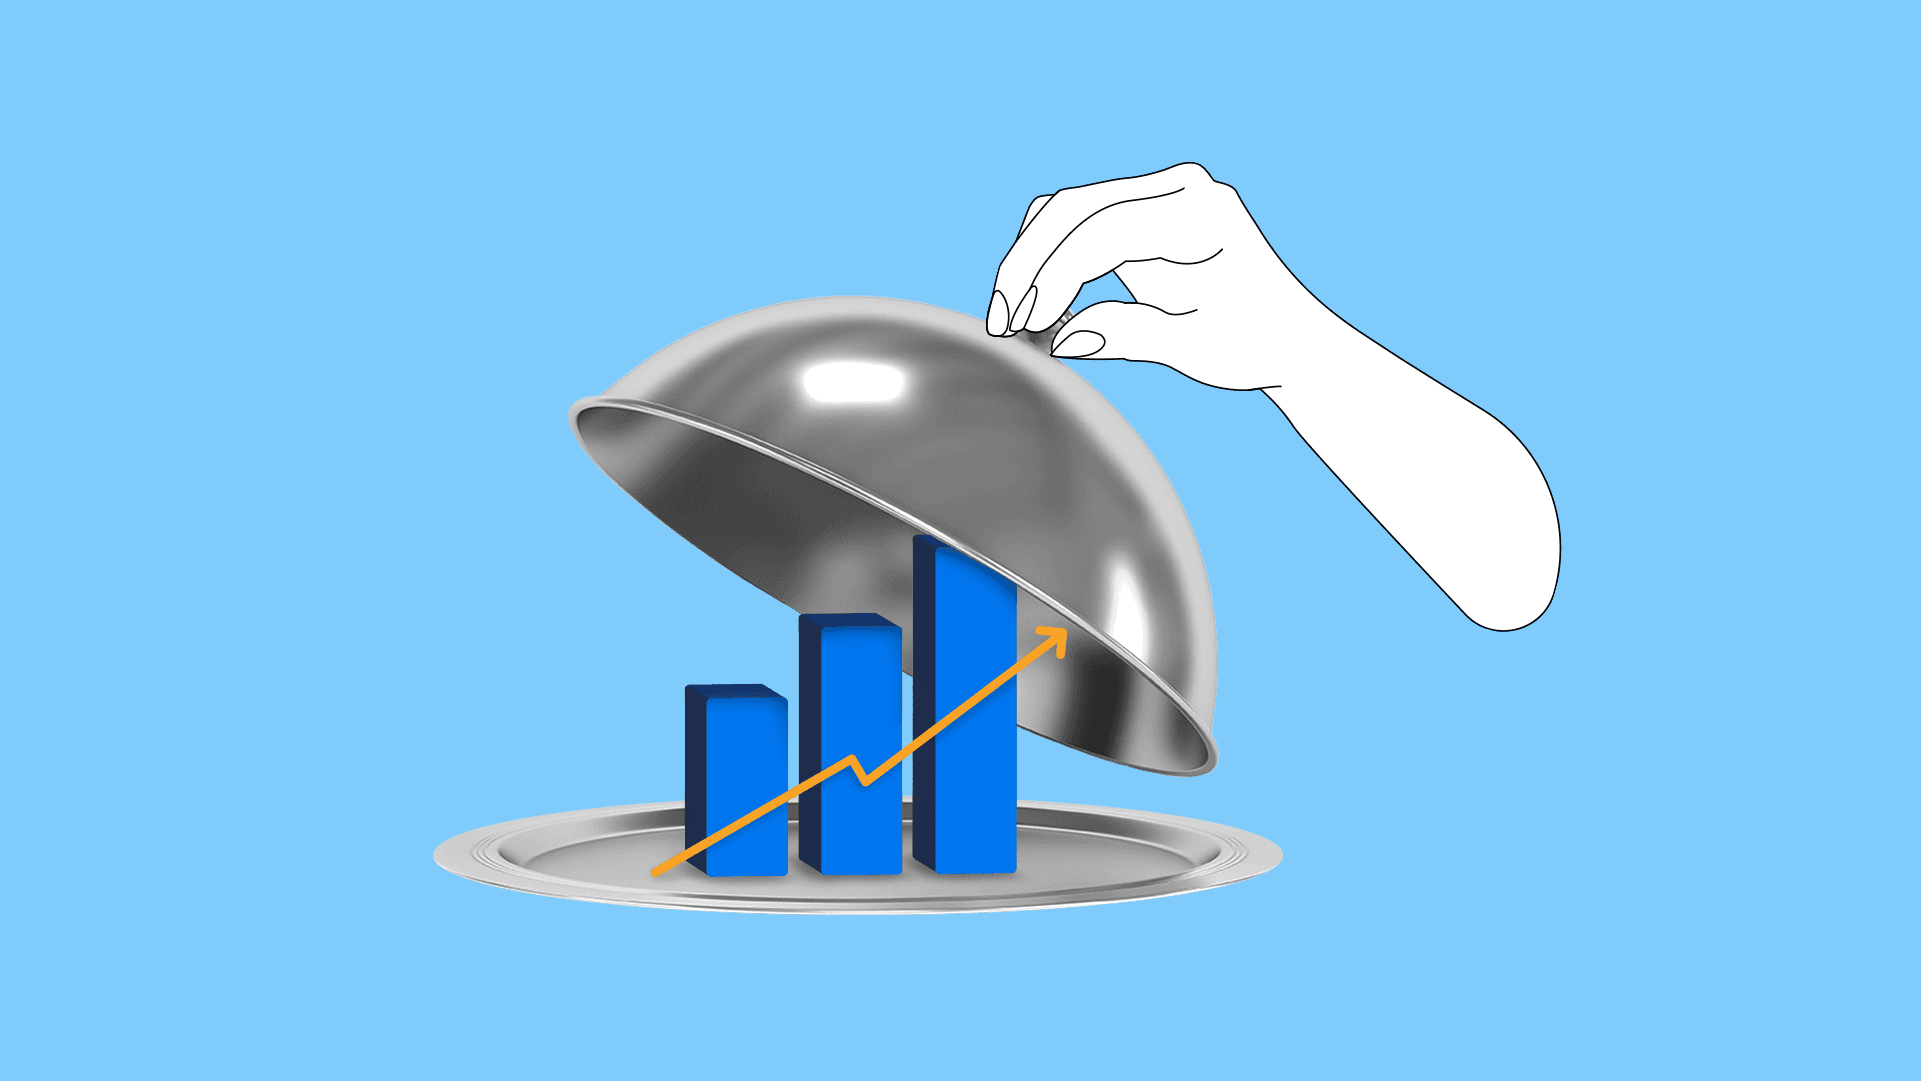 A hand lifts a metal plate cover to reveal a bar chart with a line chart on top that progresses upwards